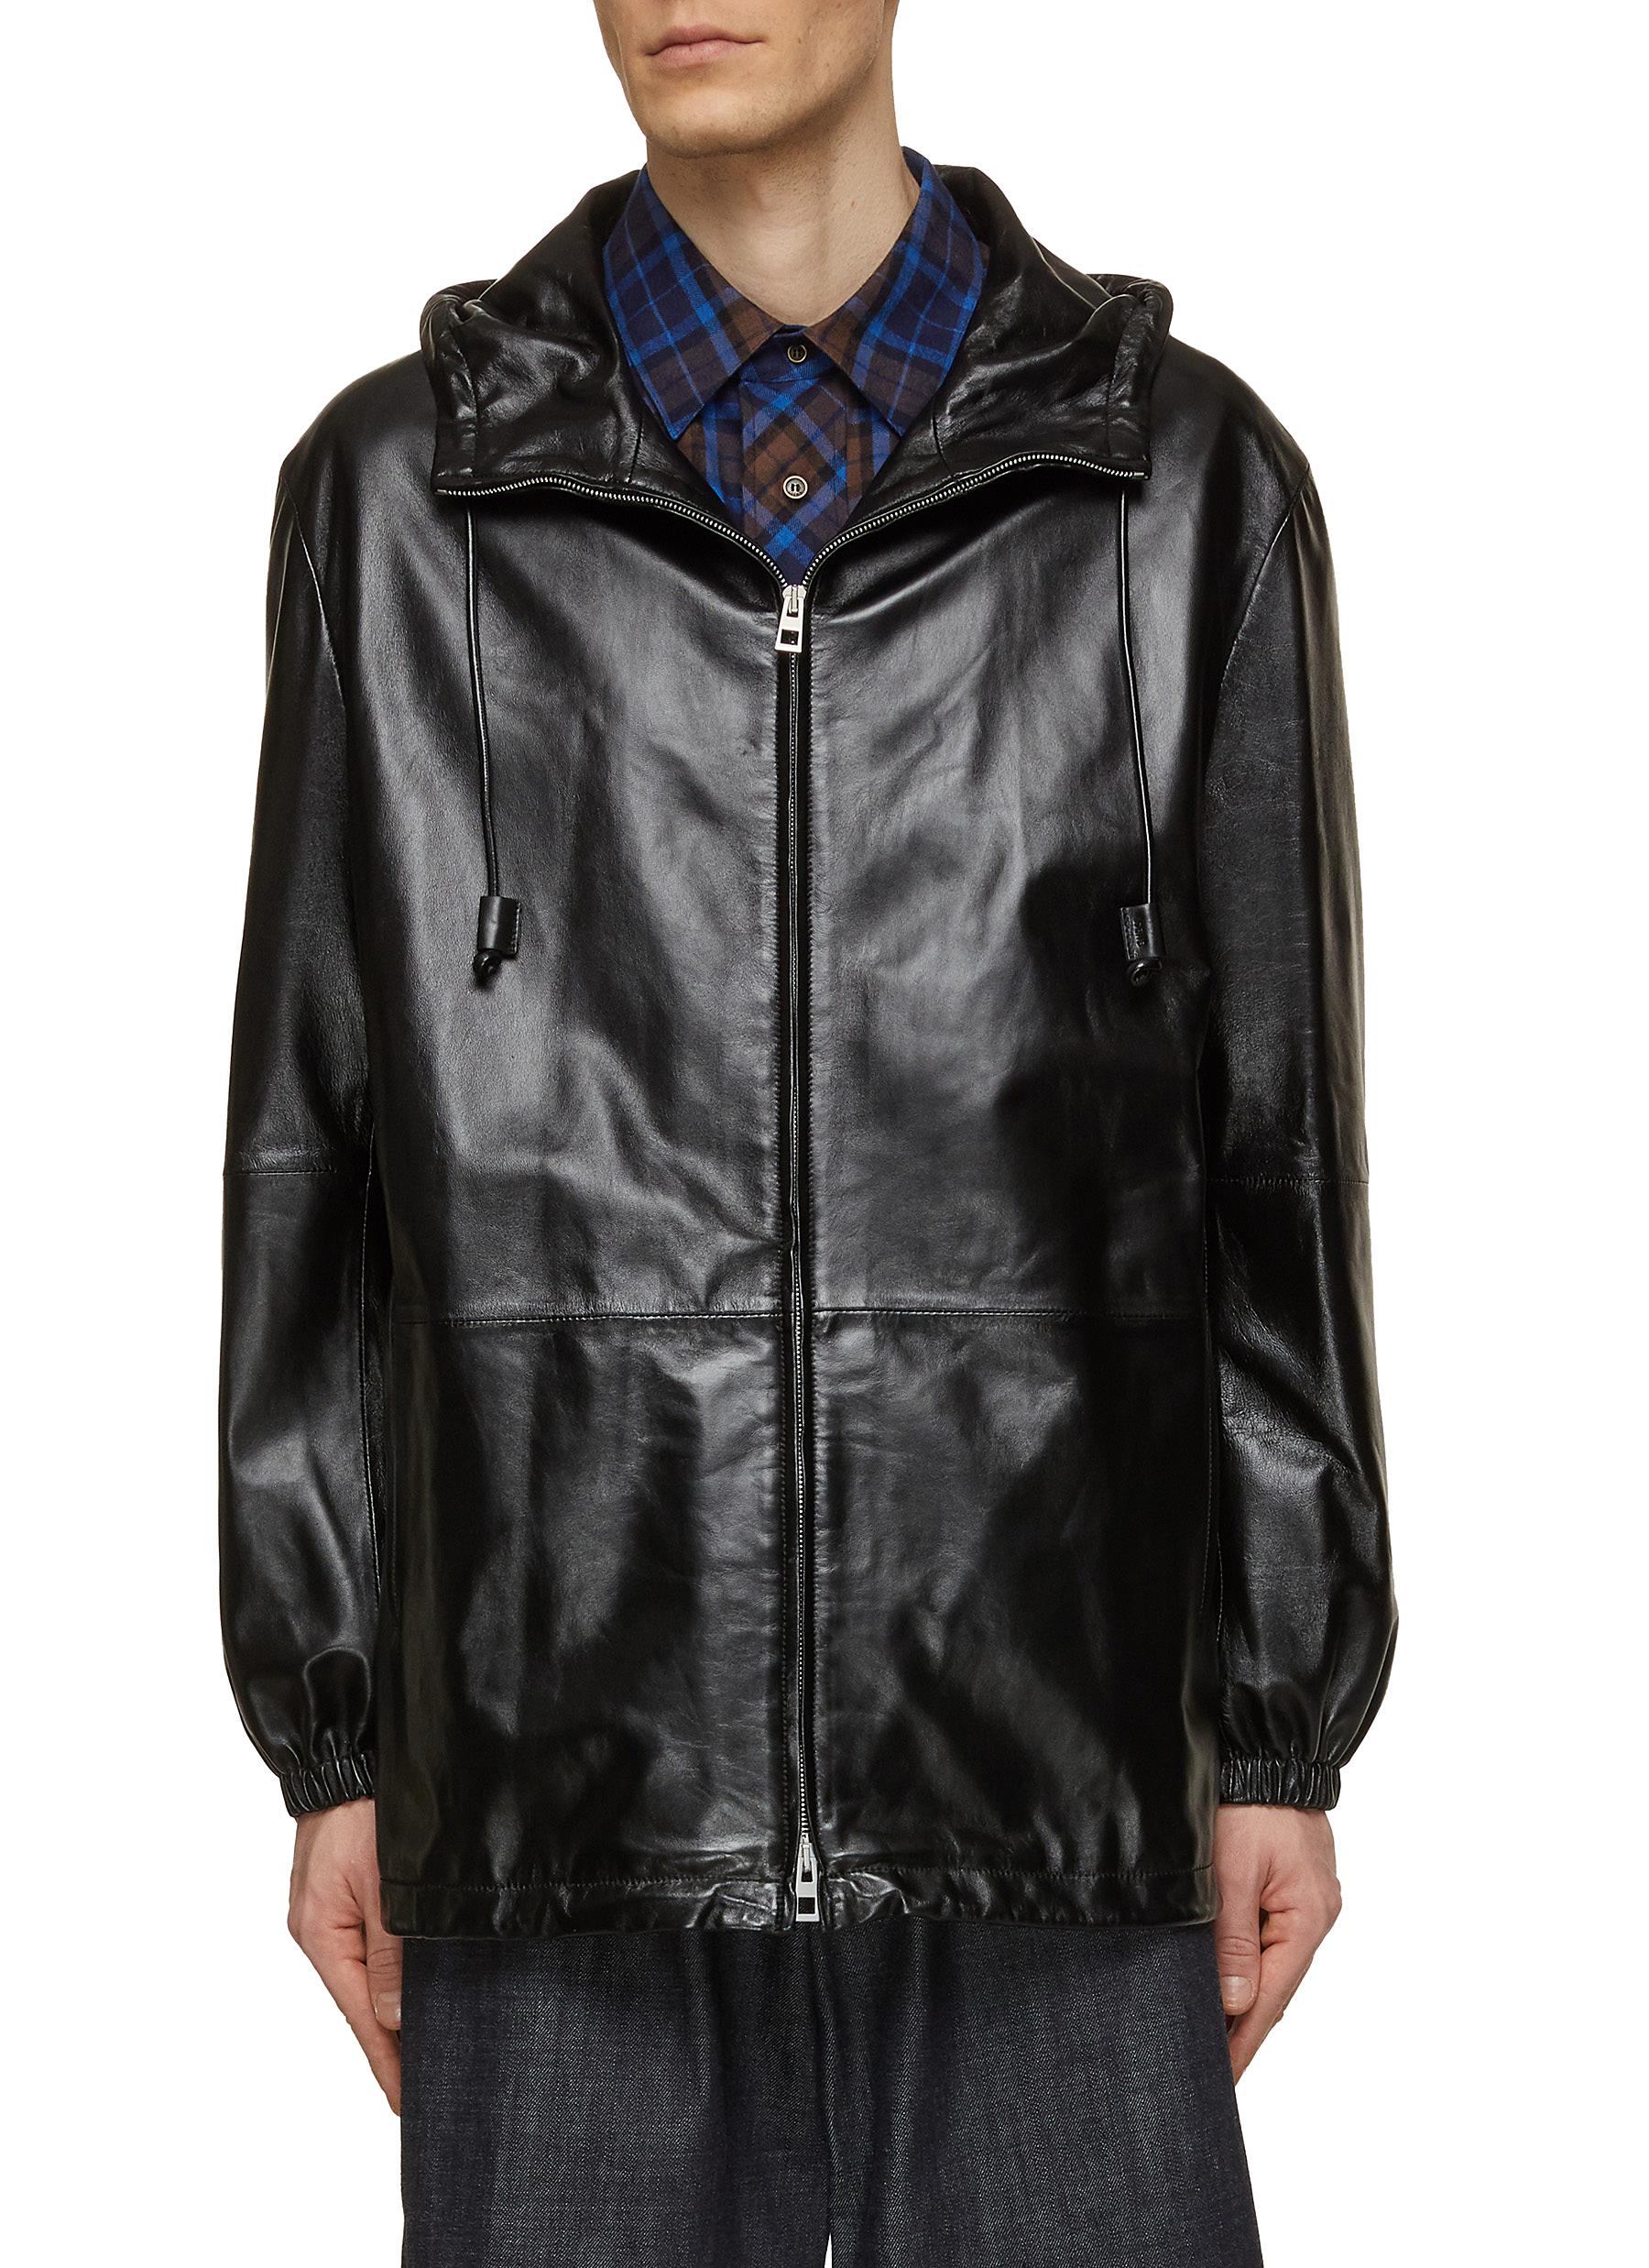 Hooded Zip Up Leather Jacket